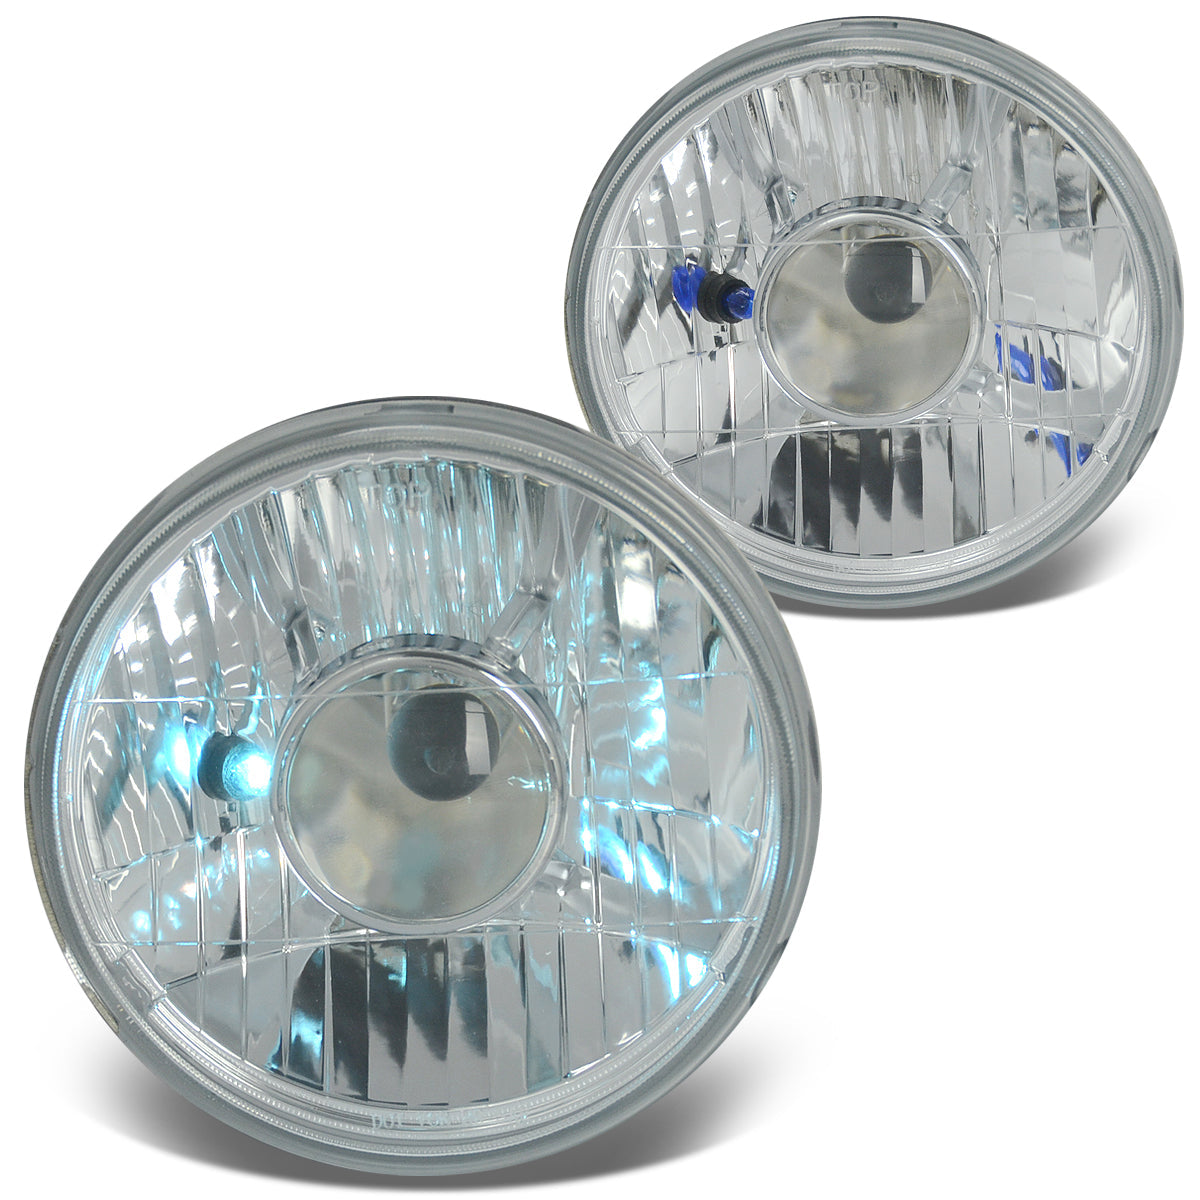 7x7 in. Round Projector Headlights